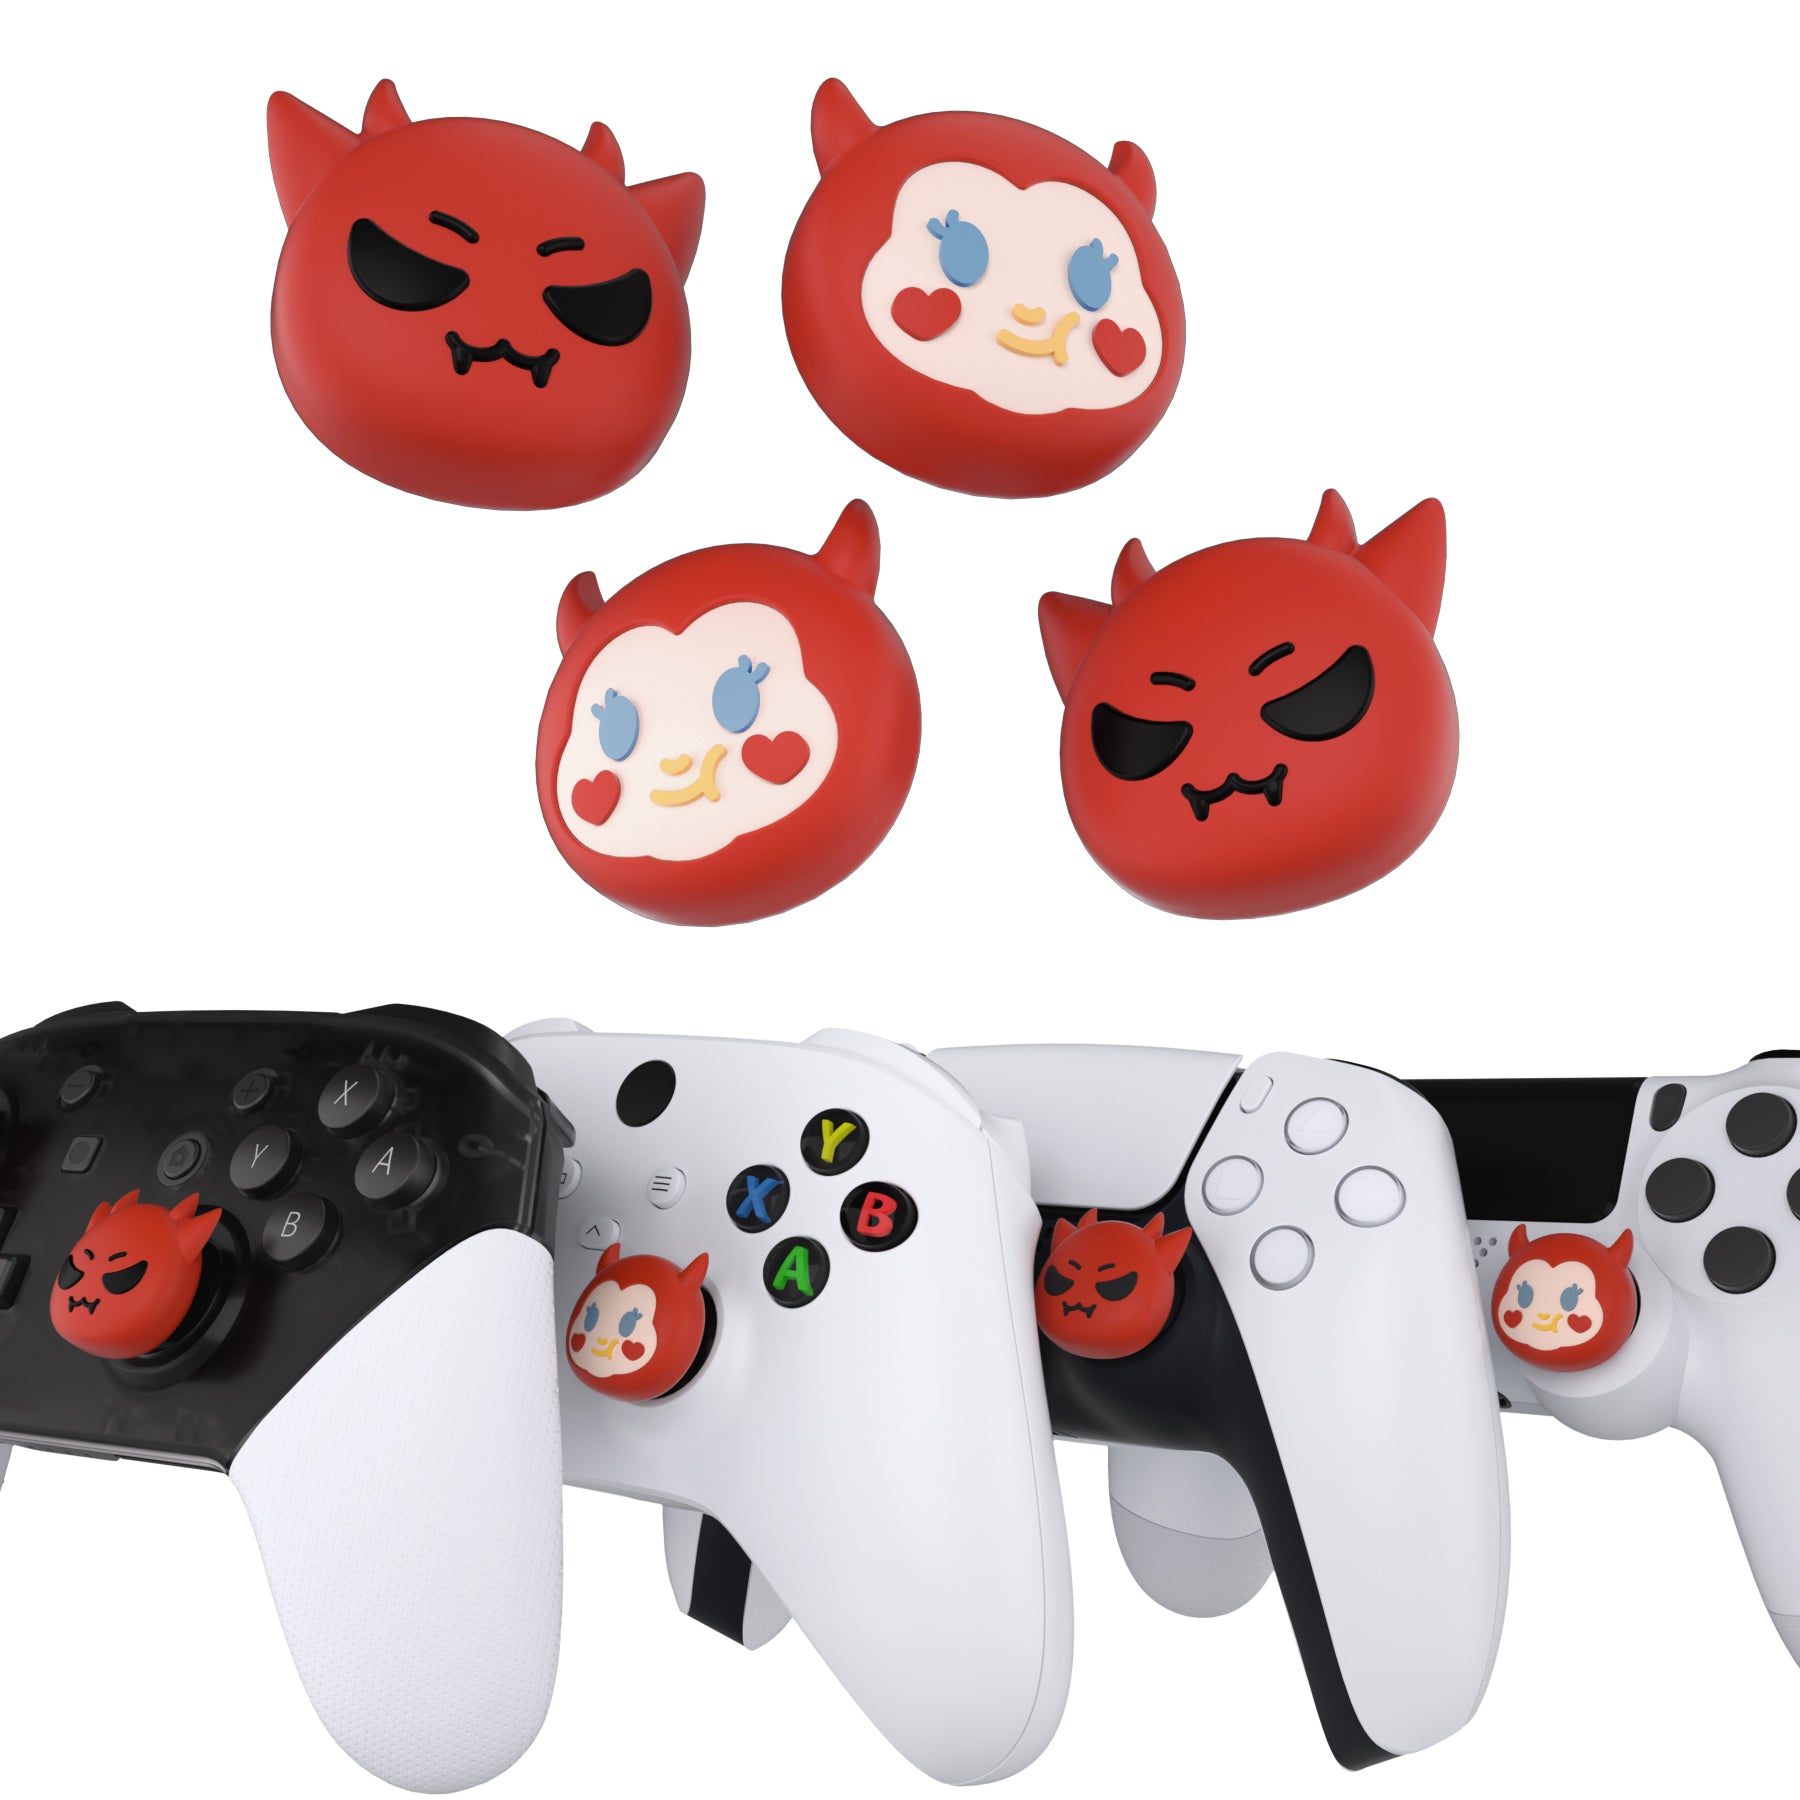 PlayVital Cute Thumb Grip Caps for ps5/4 Controller, Silicone Analog Stick Caps Cover for Xbox Series X/S, Thumbstick Caps for Switch Pro Controller - Little Devils - PJM3032 PlayVital